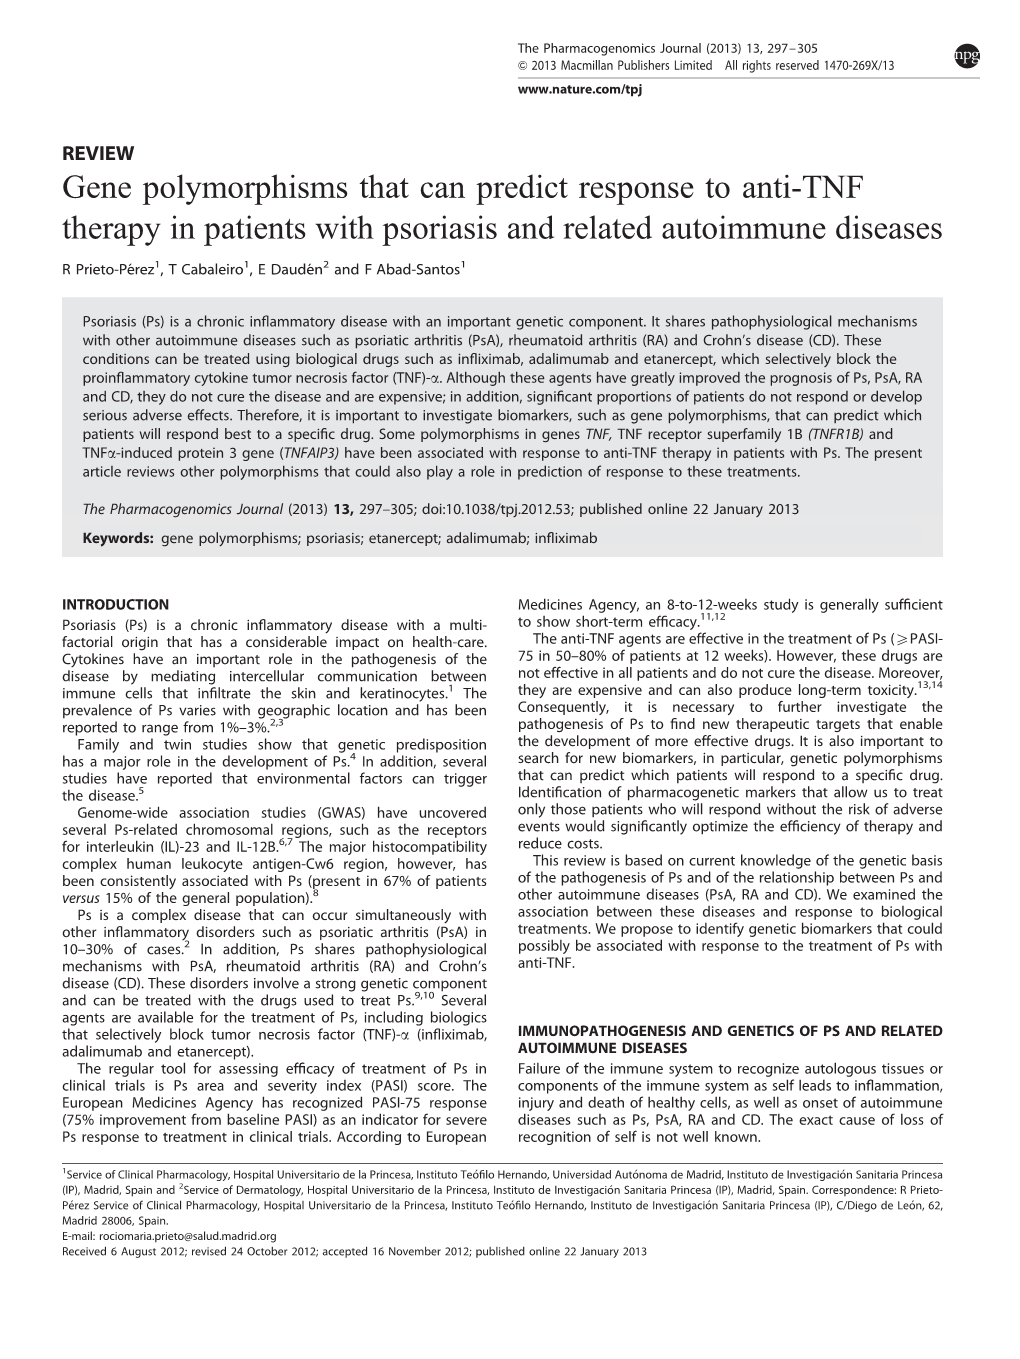 Gene Polymorphisms That Can Predict Response to Anti-TNF Therapy in Patients with Psoriasis and Related Autoimmune Diseases